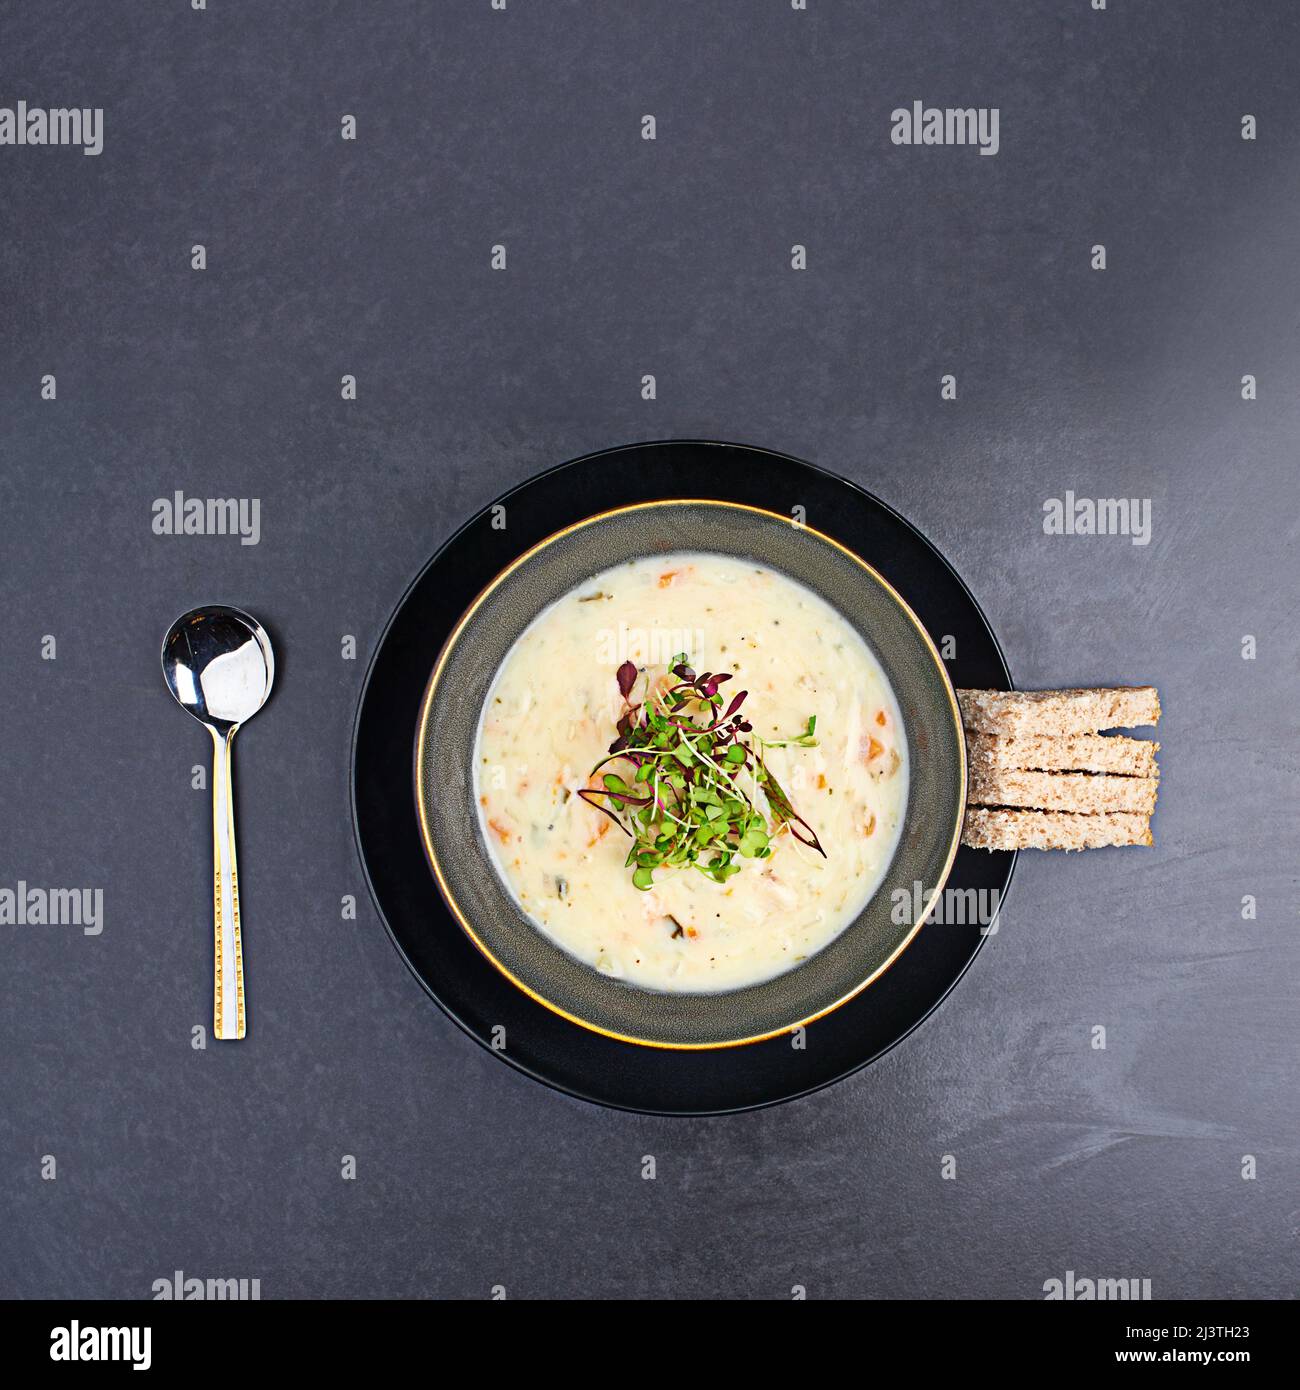 Scrumptious soup. High angle studio shot of delicious soup and bread sticks on a table. Stock Photo